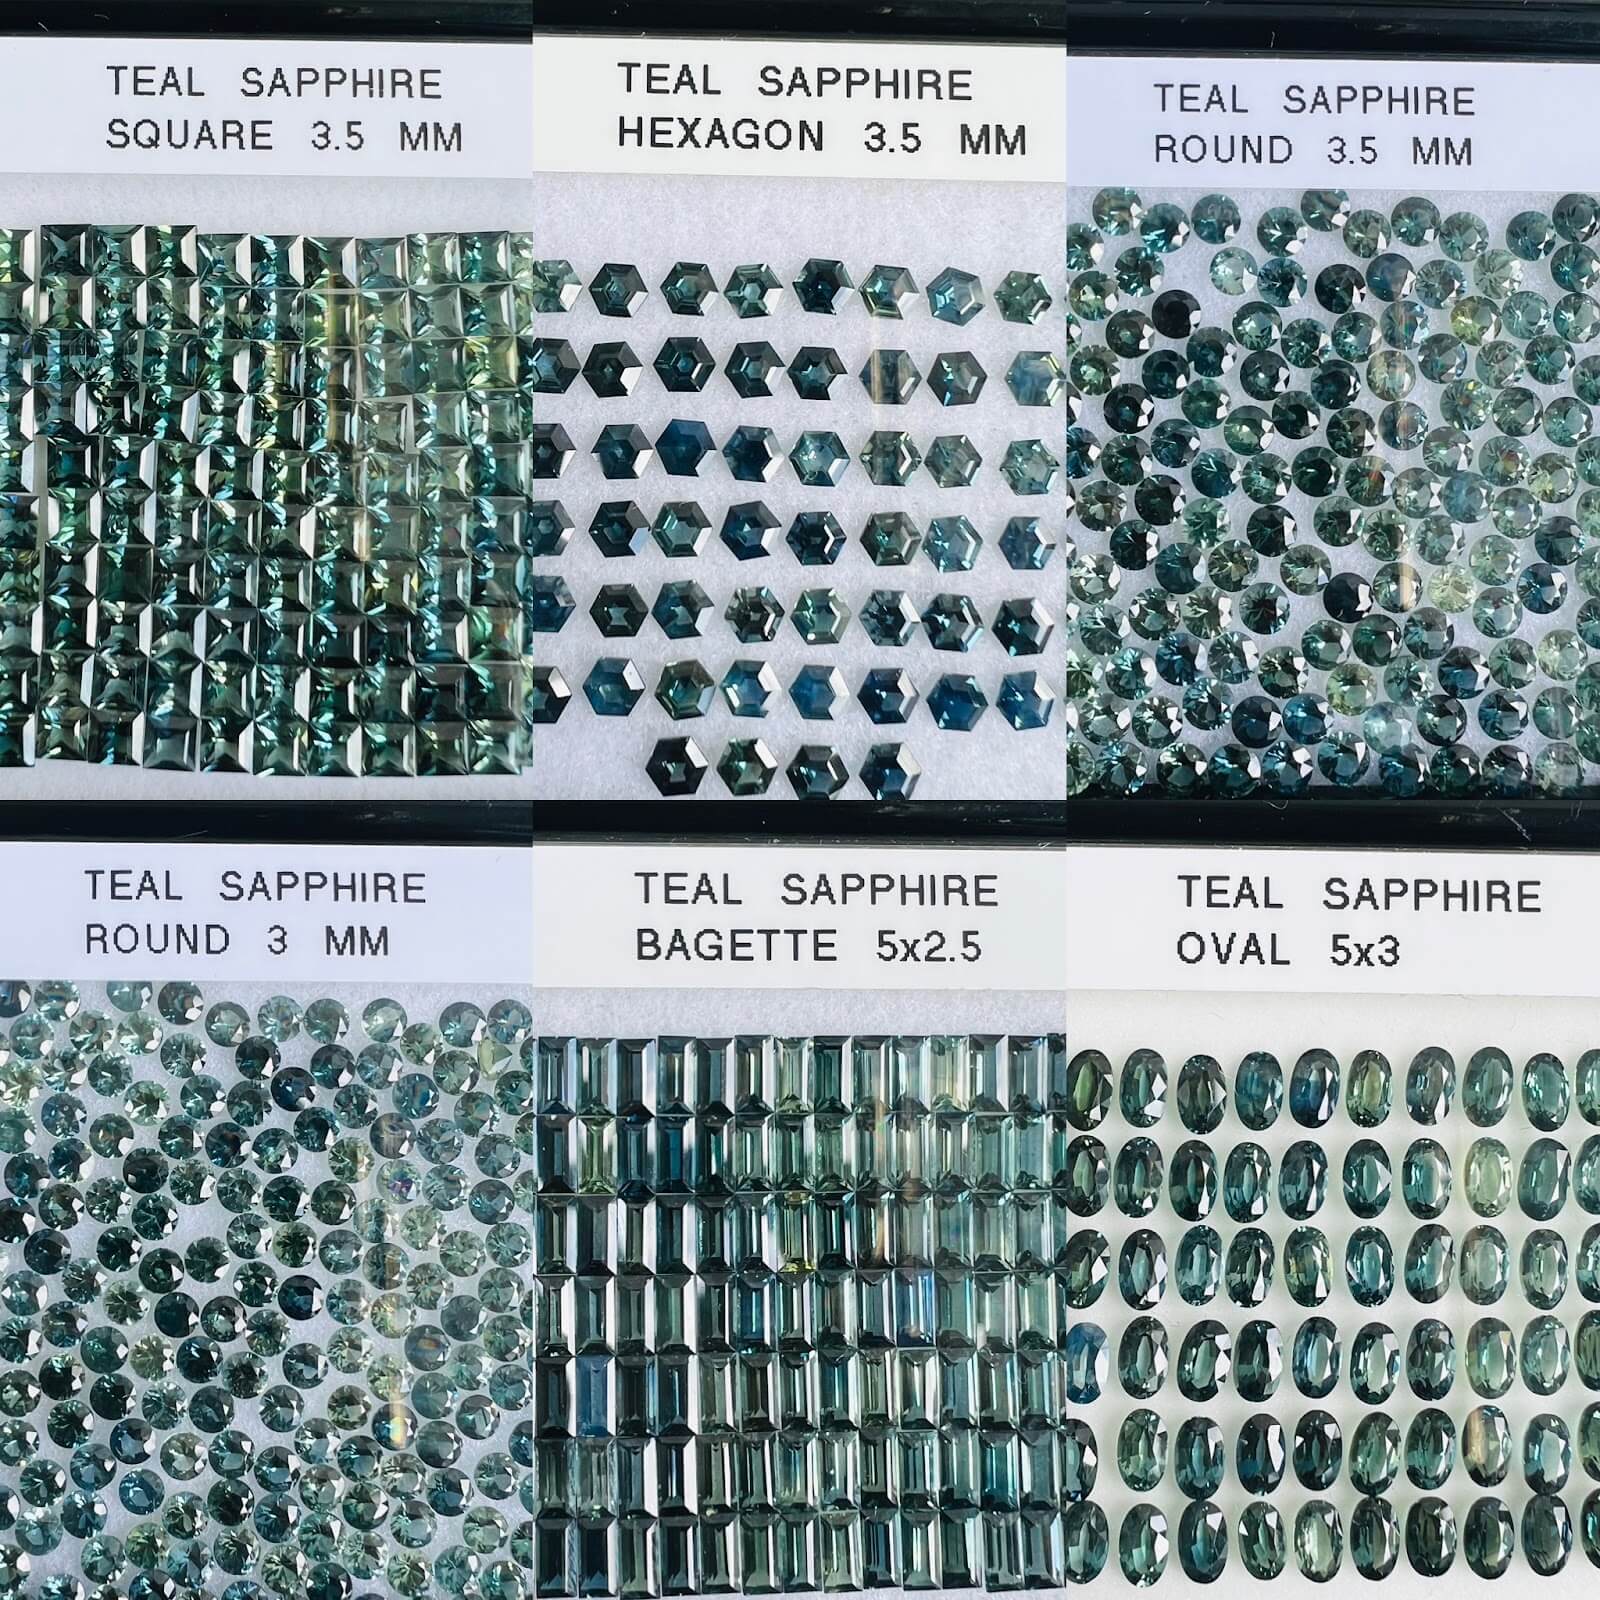 Calibrated Ethically sourced Teal Sapphire, Unheated Sapphires, Bi-Color Sapphire, Green Sapphire, Hexagon Teal Sapphires, Round Teal Sapphire, Oval Teal Sapphire, Bagette Teal Sapphire